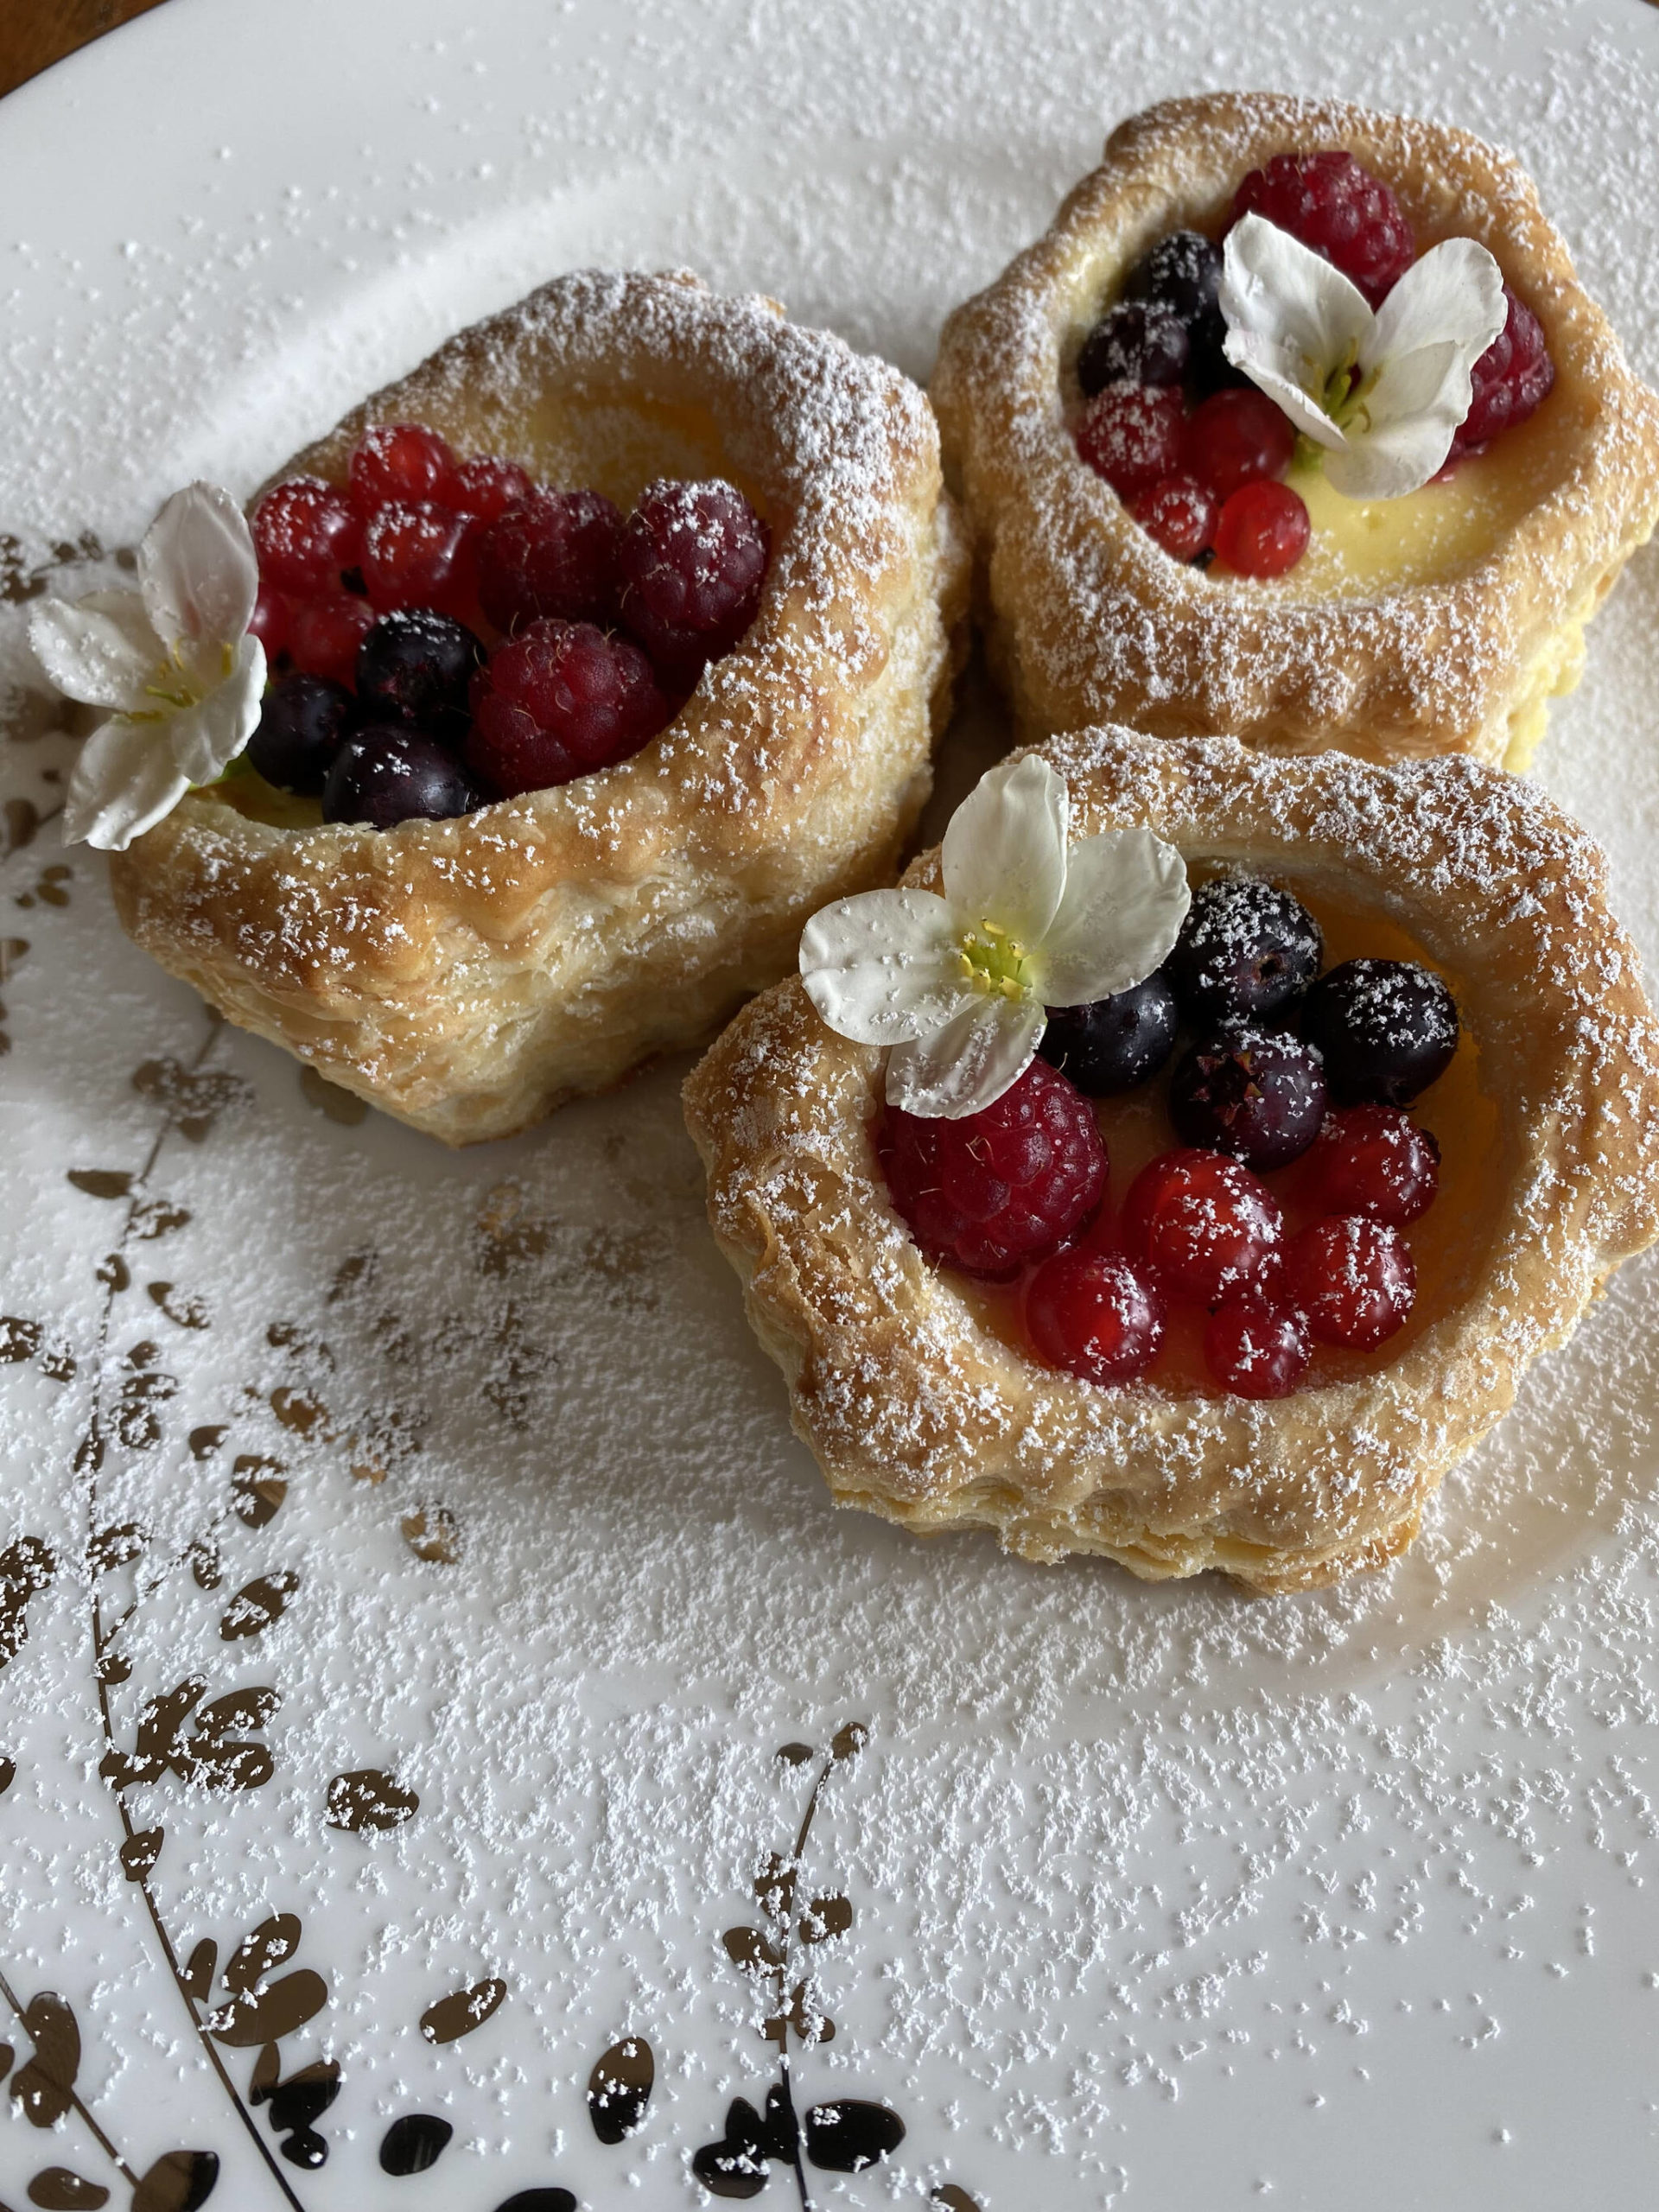 Homemade lemon curd and fruit are an easy way to fill puff pastry tart shells on the fly. (Photo by Tressa Dale/Peninsula Clarion)